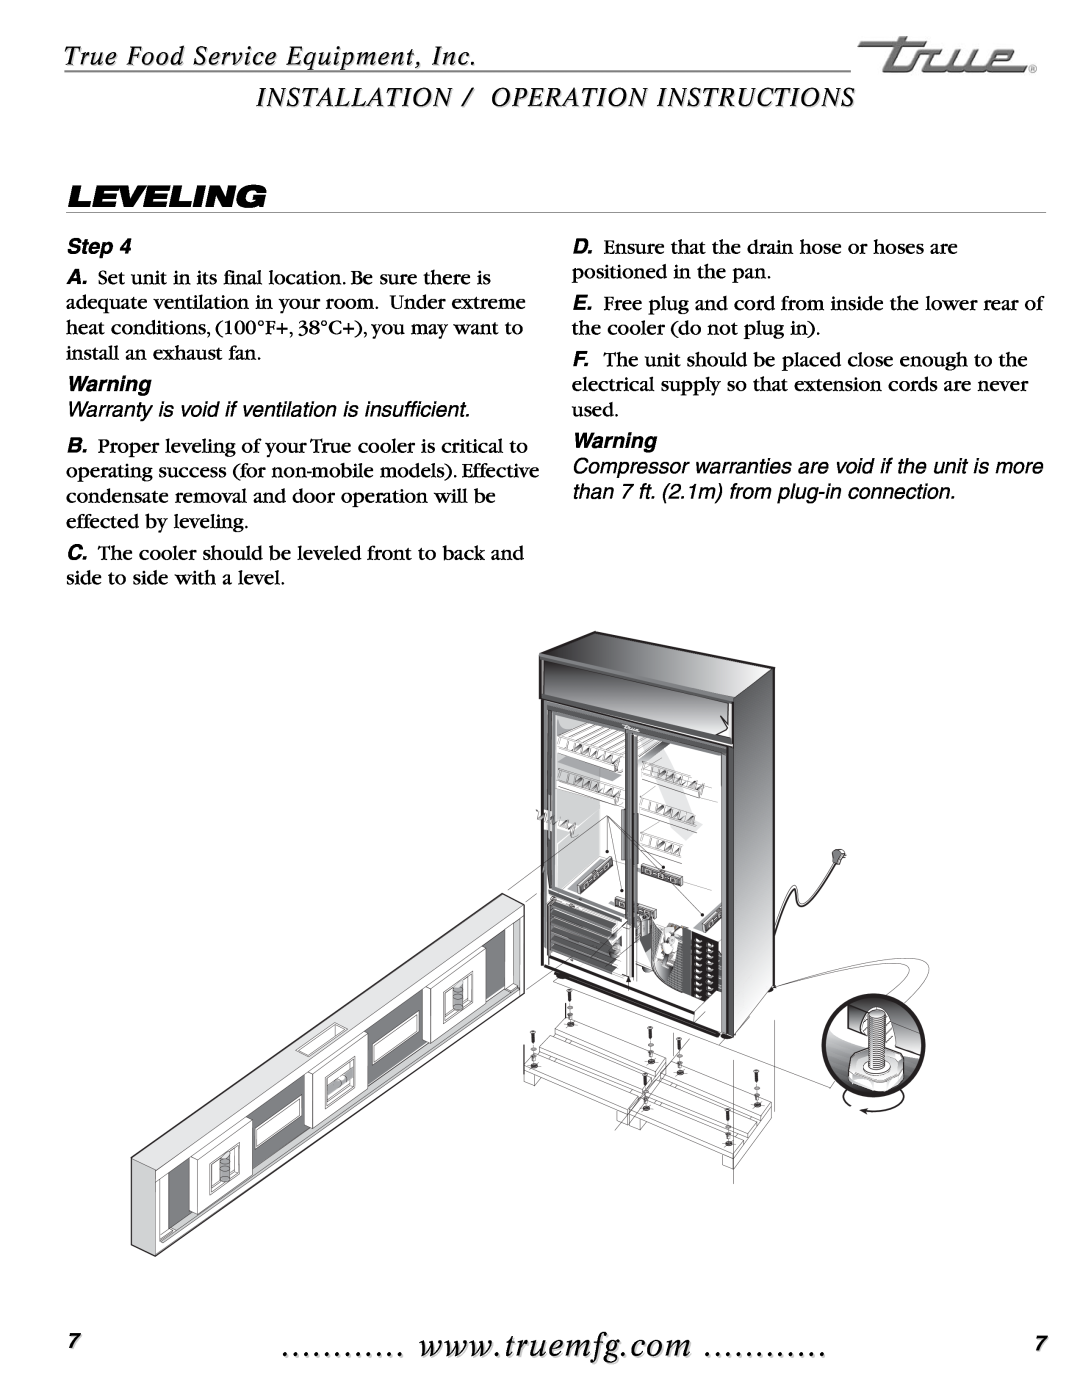 True Manufacturing Company GDIM-49 Leveling, True Food Service Equipment, Inc, Installation / Operation Instructions, Step 